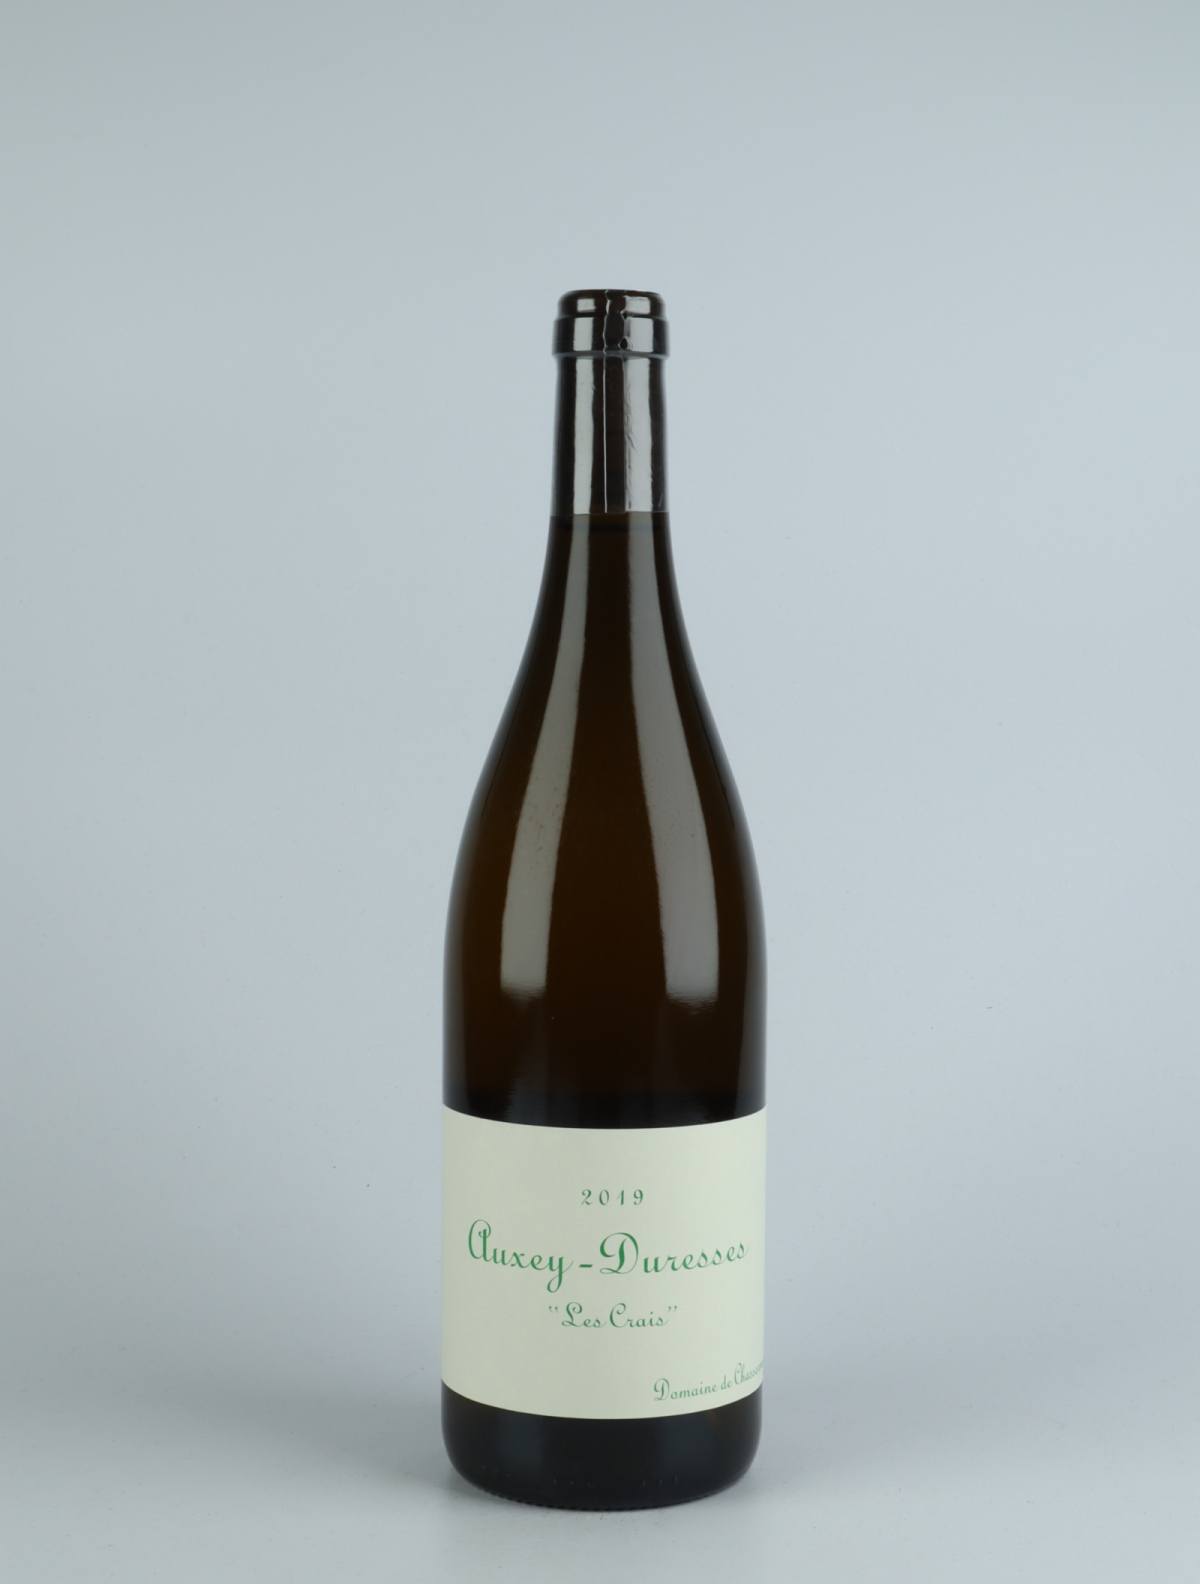 A bottle 2019 Auxey Duresses Blanc - Les Crais White wine from Domaine de Chassorney, Burgundy in France